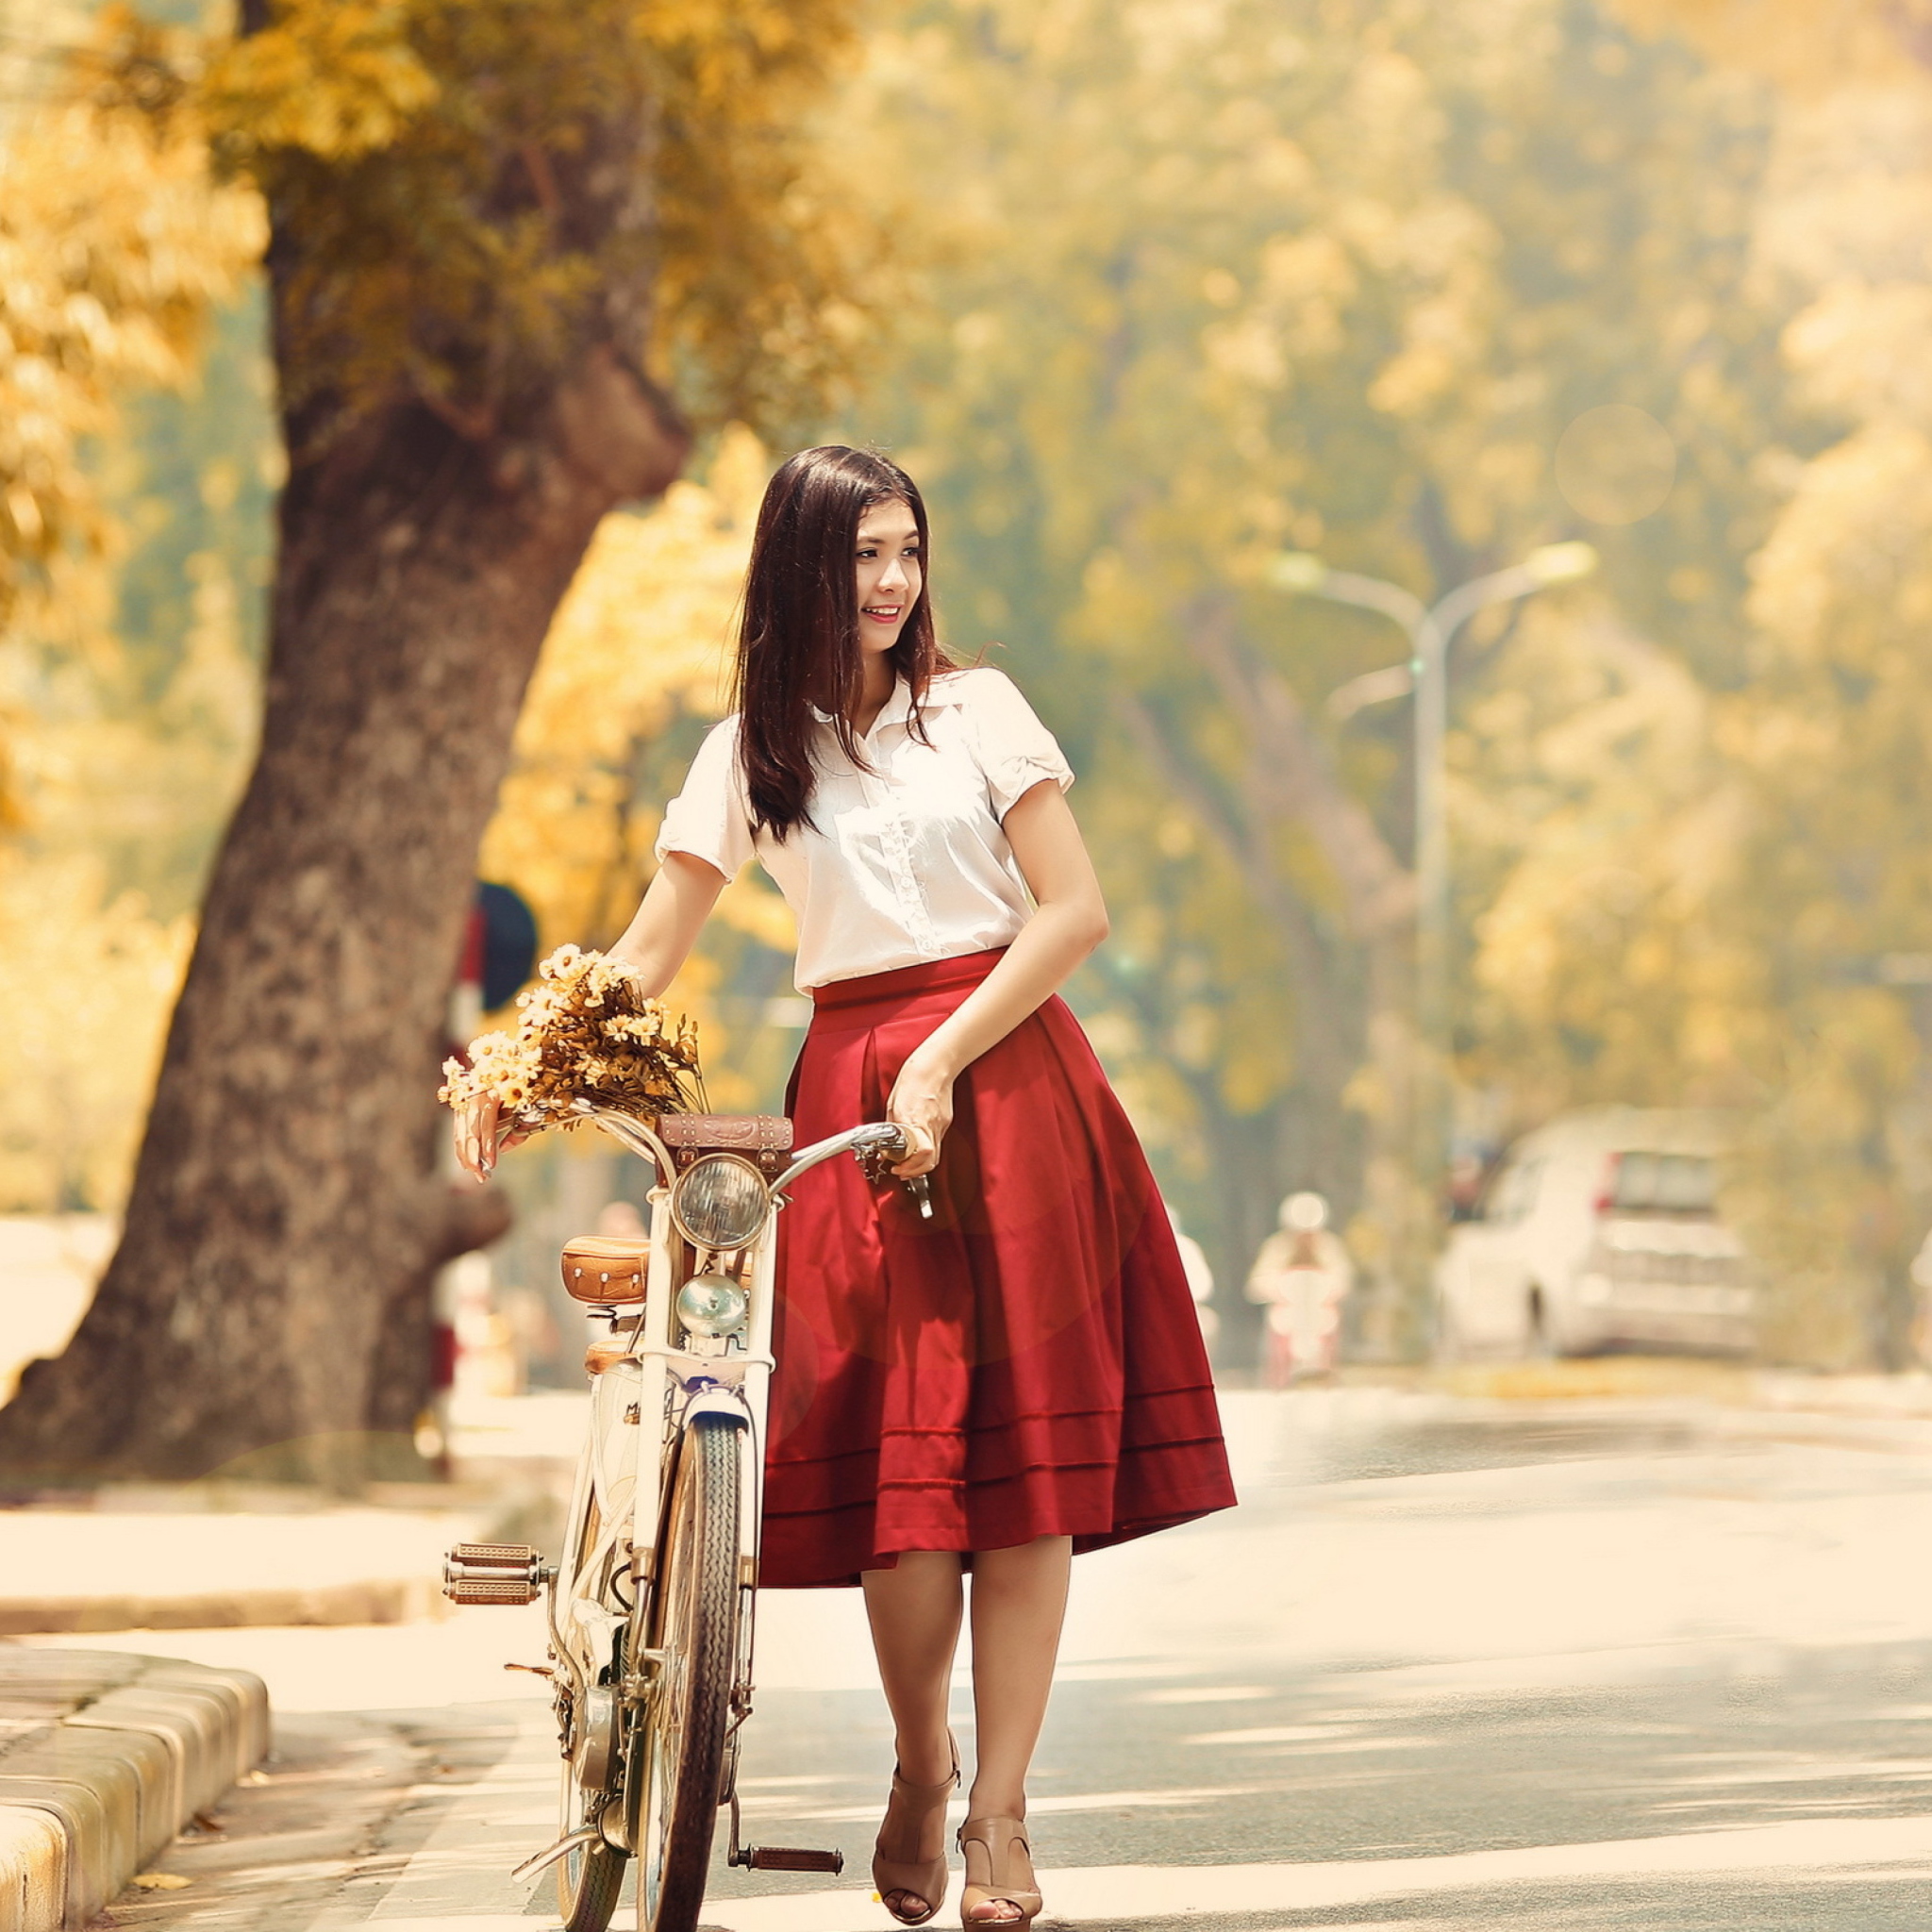 Romantic Girl With Bicycle And Flowers screenshot #1 2048x2048